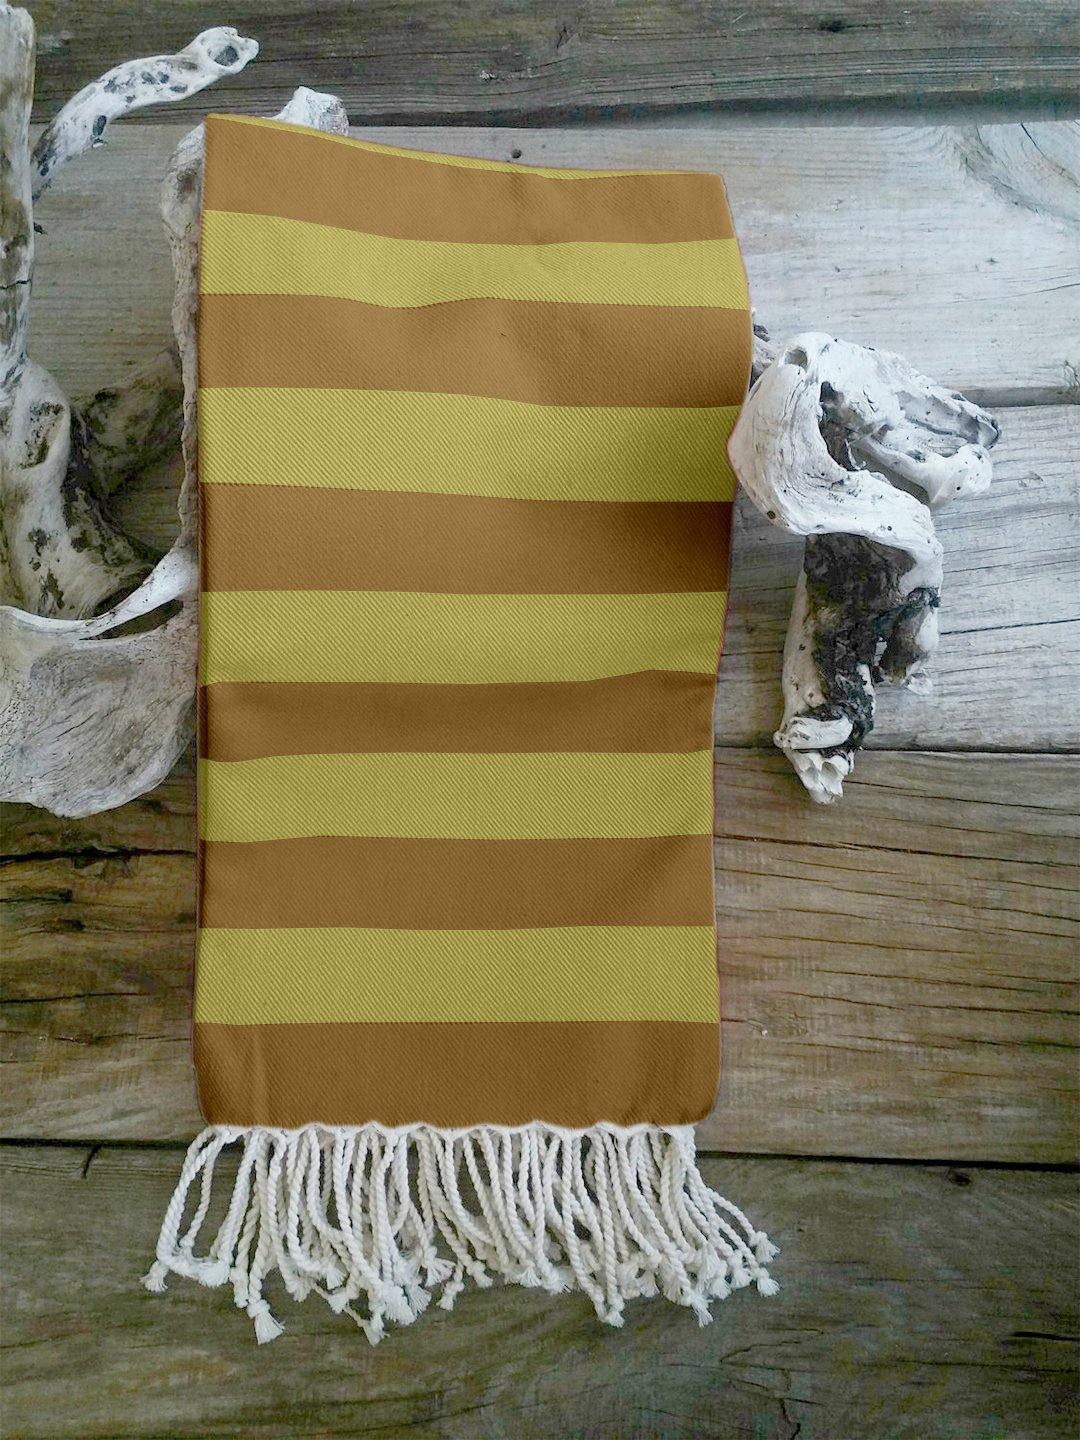 Lushomes Hammam Light Yellow Fouta Towel Cotton Multipurpose Towel With Fringes (76 x 152 cms, Single Pc). - Lushomes